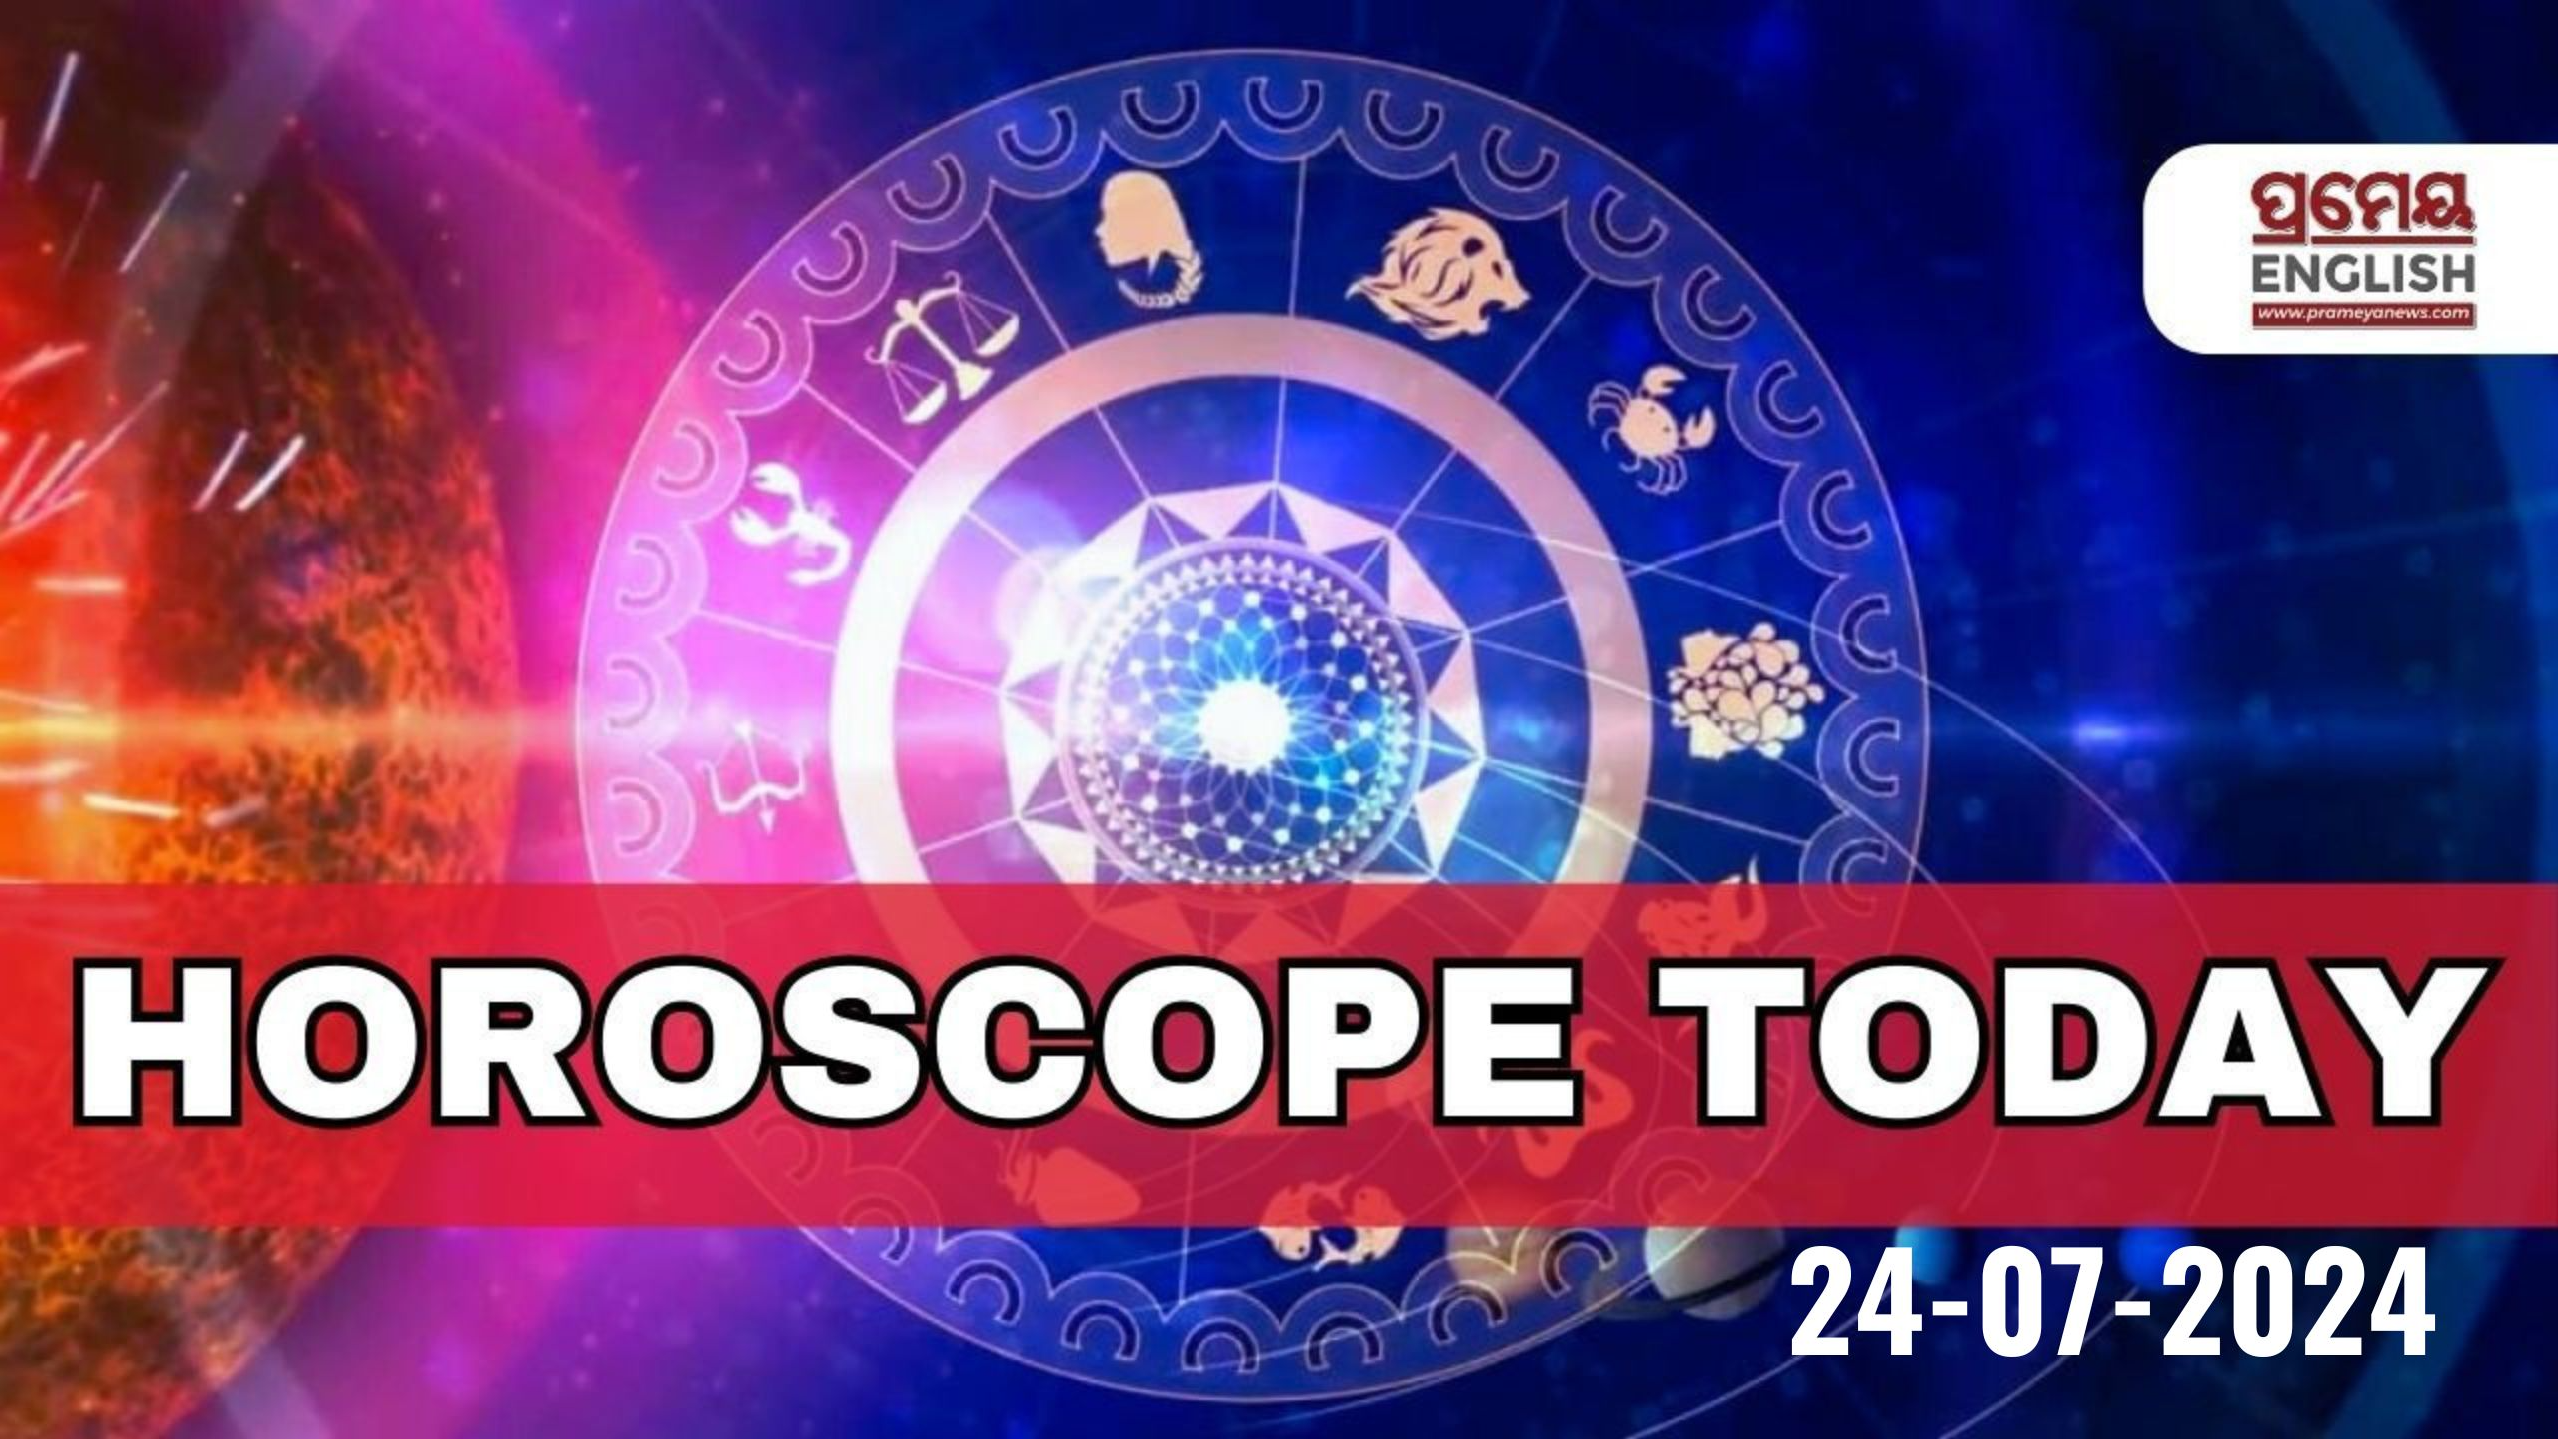 Horoscope Today: Astrological prediction for April 30, 2024